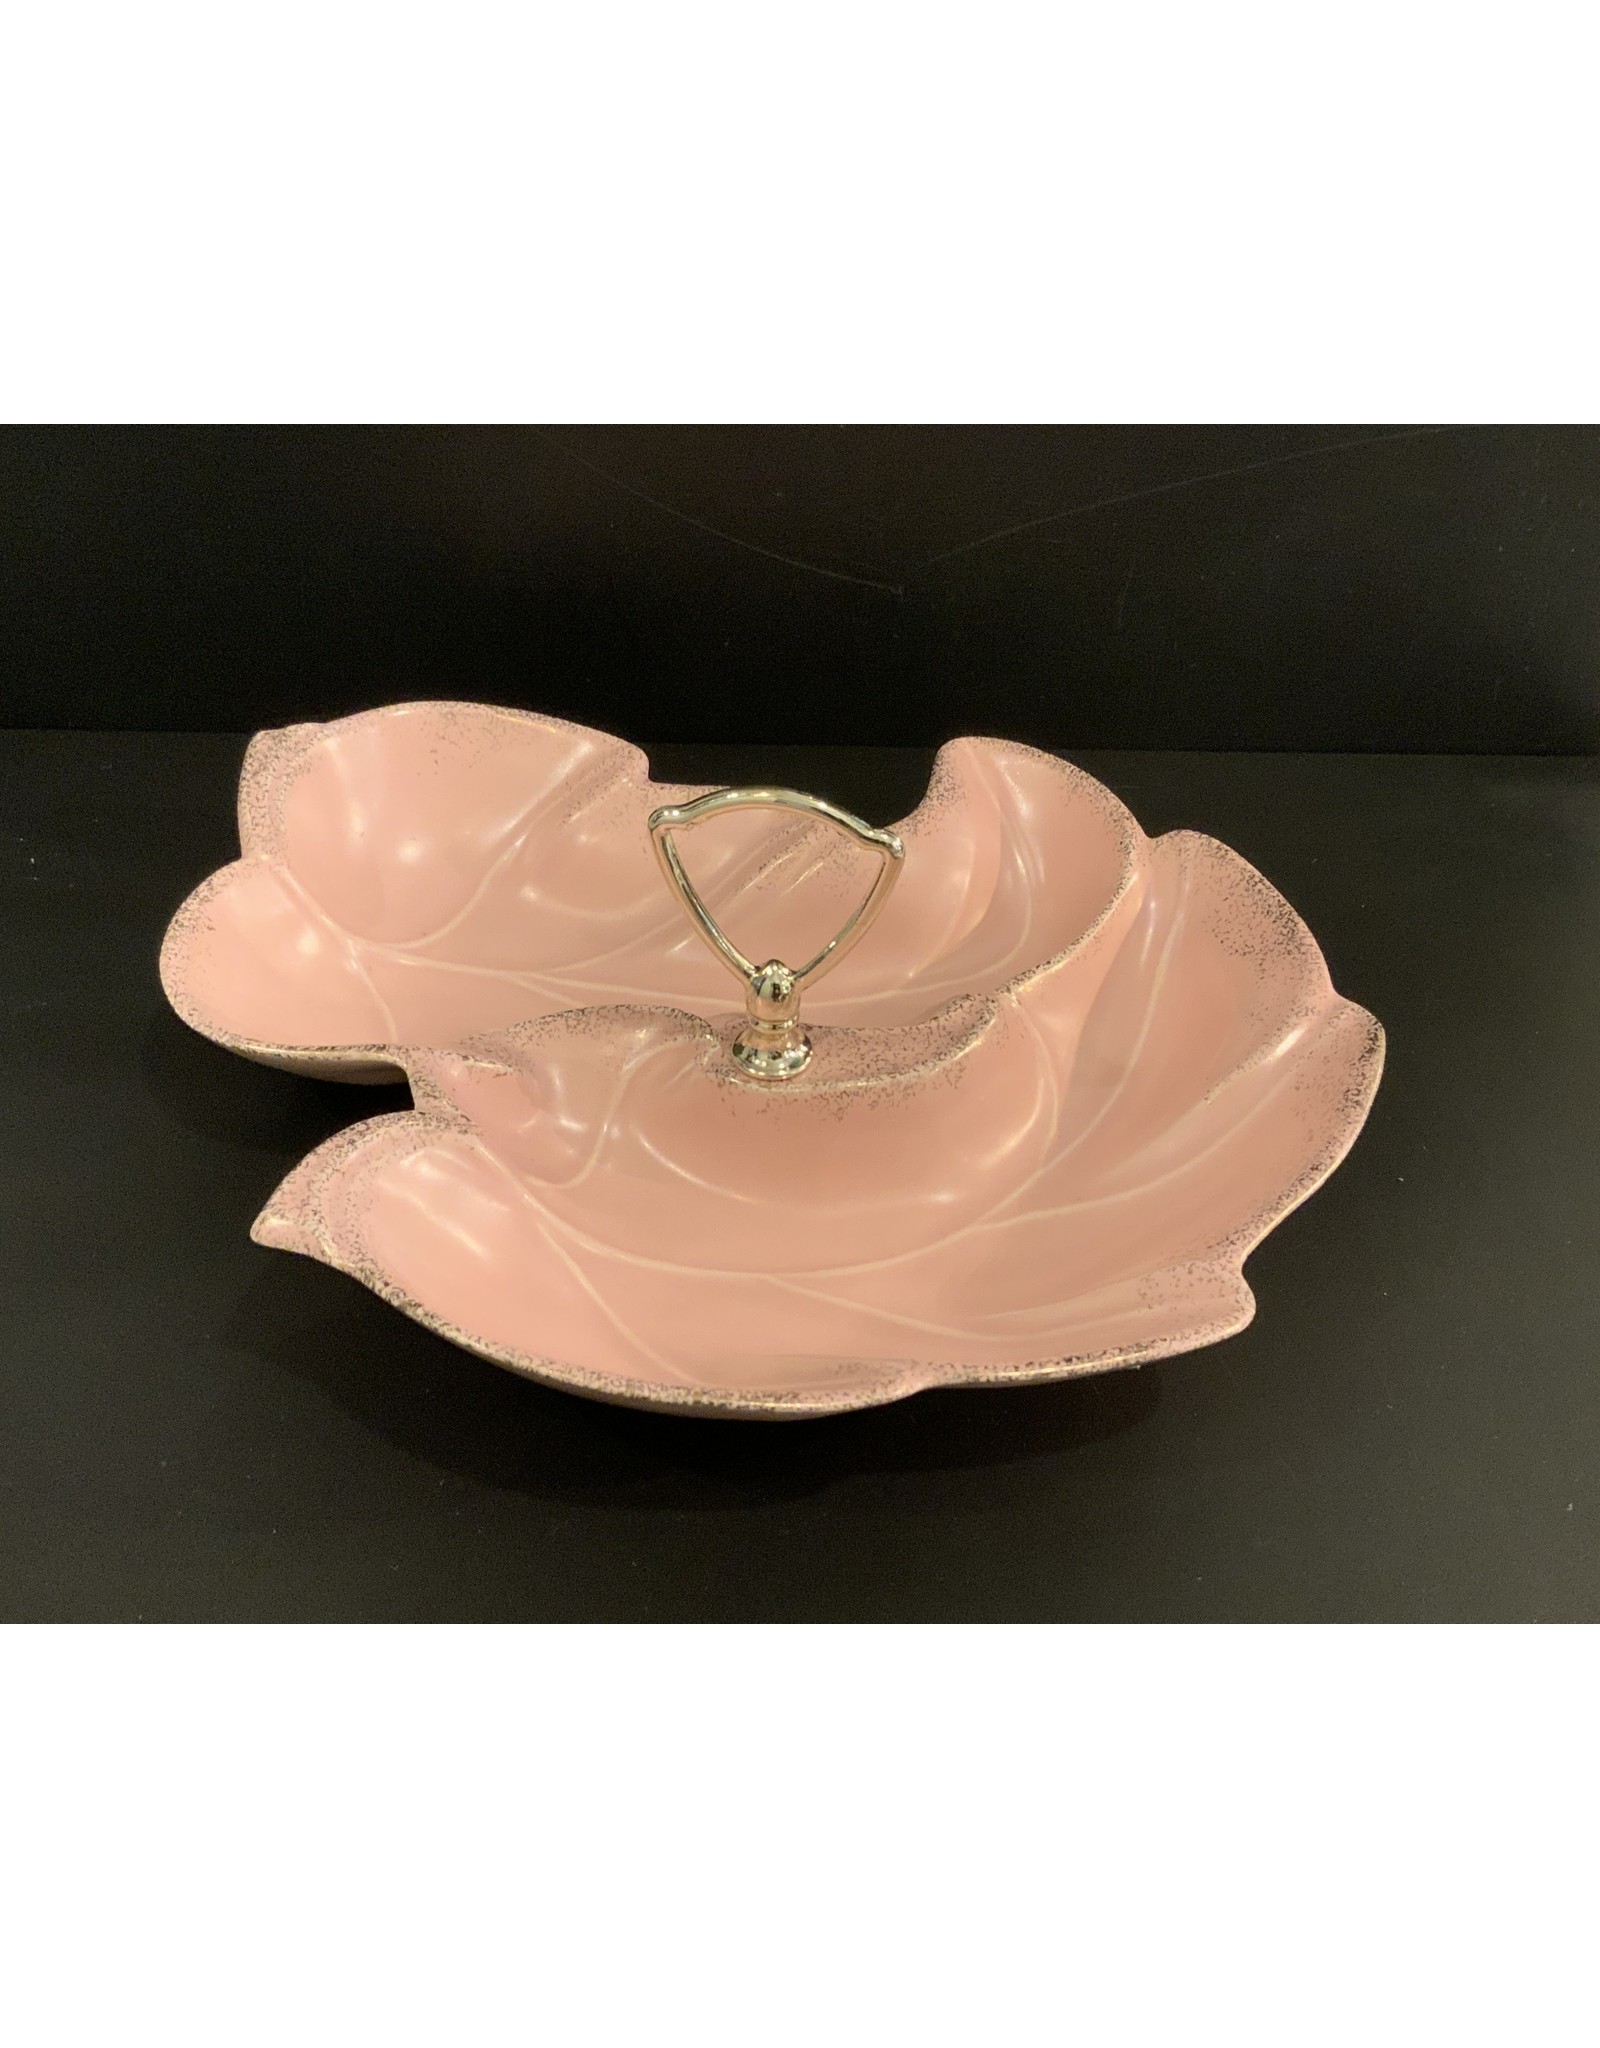 SPV 1950's Pink and Gold Ceramic Leaf Dish With Handle